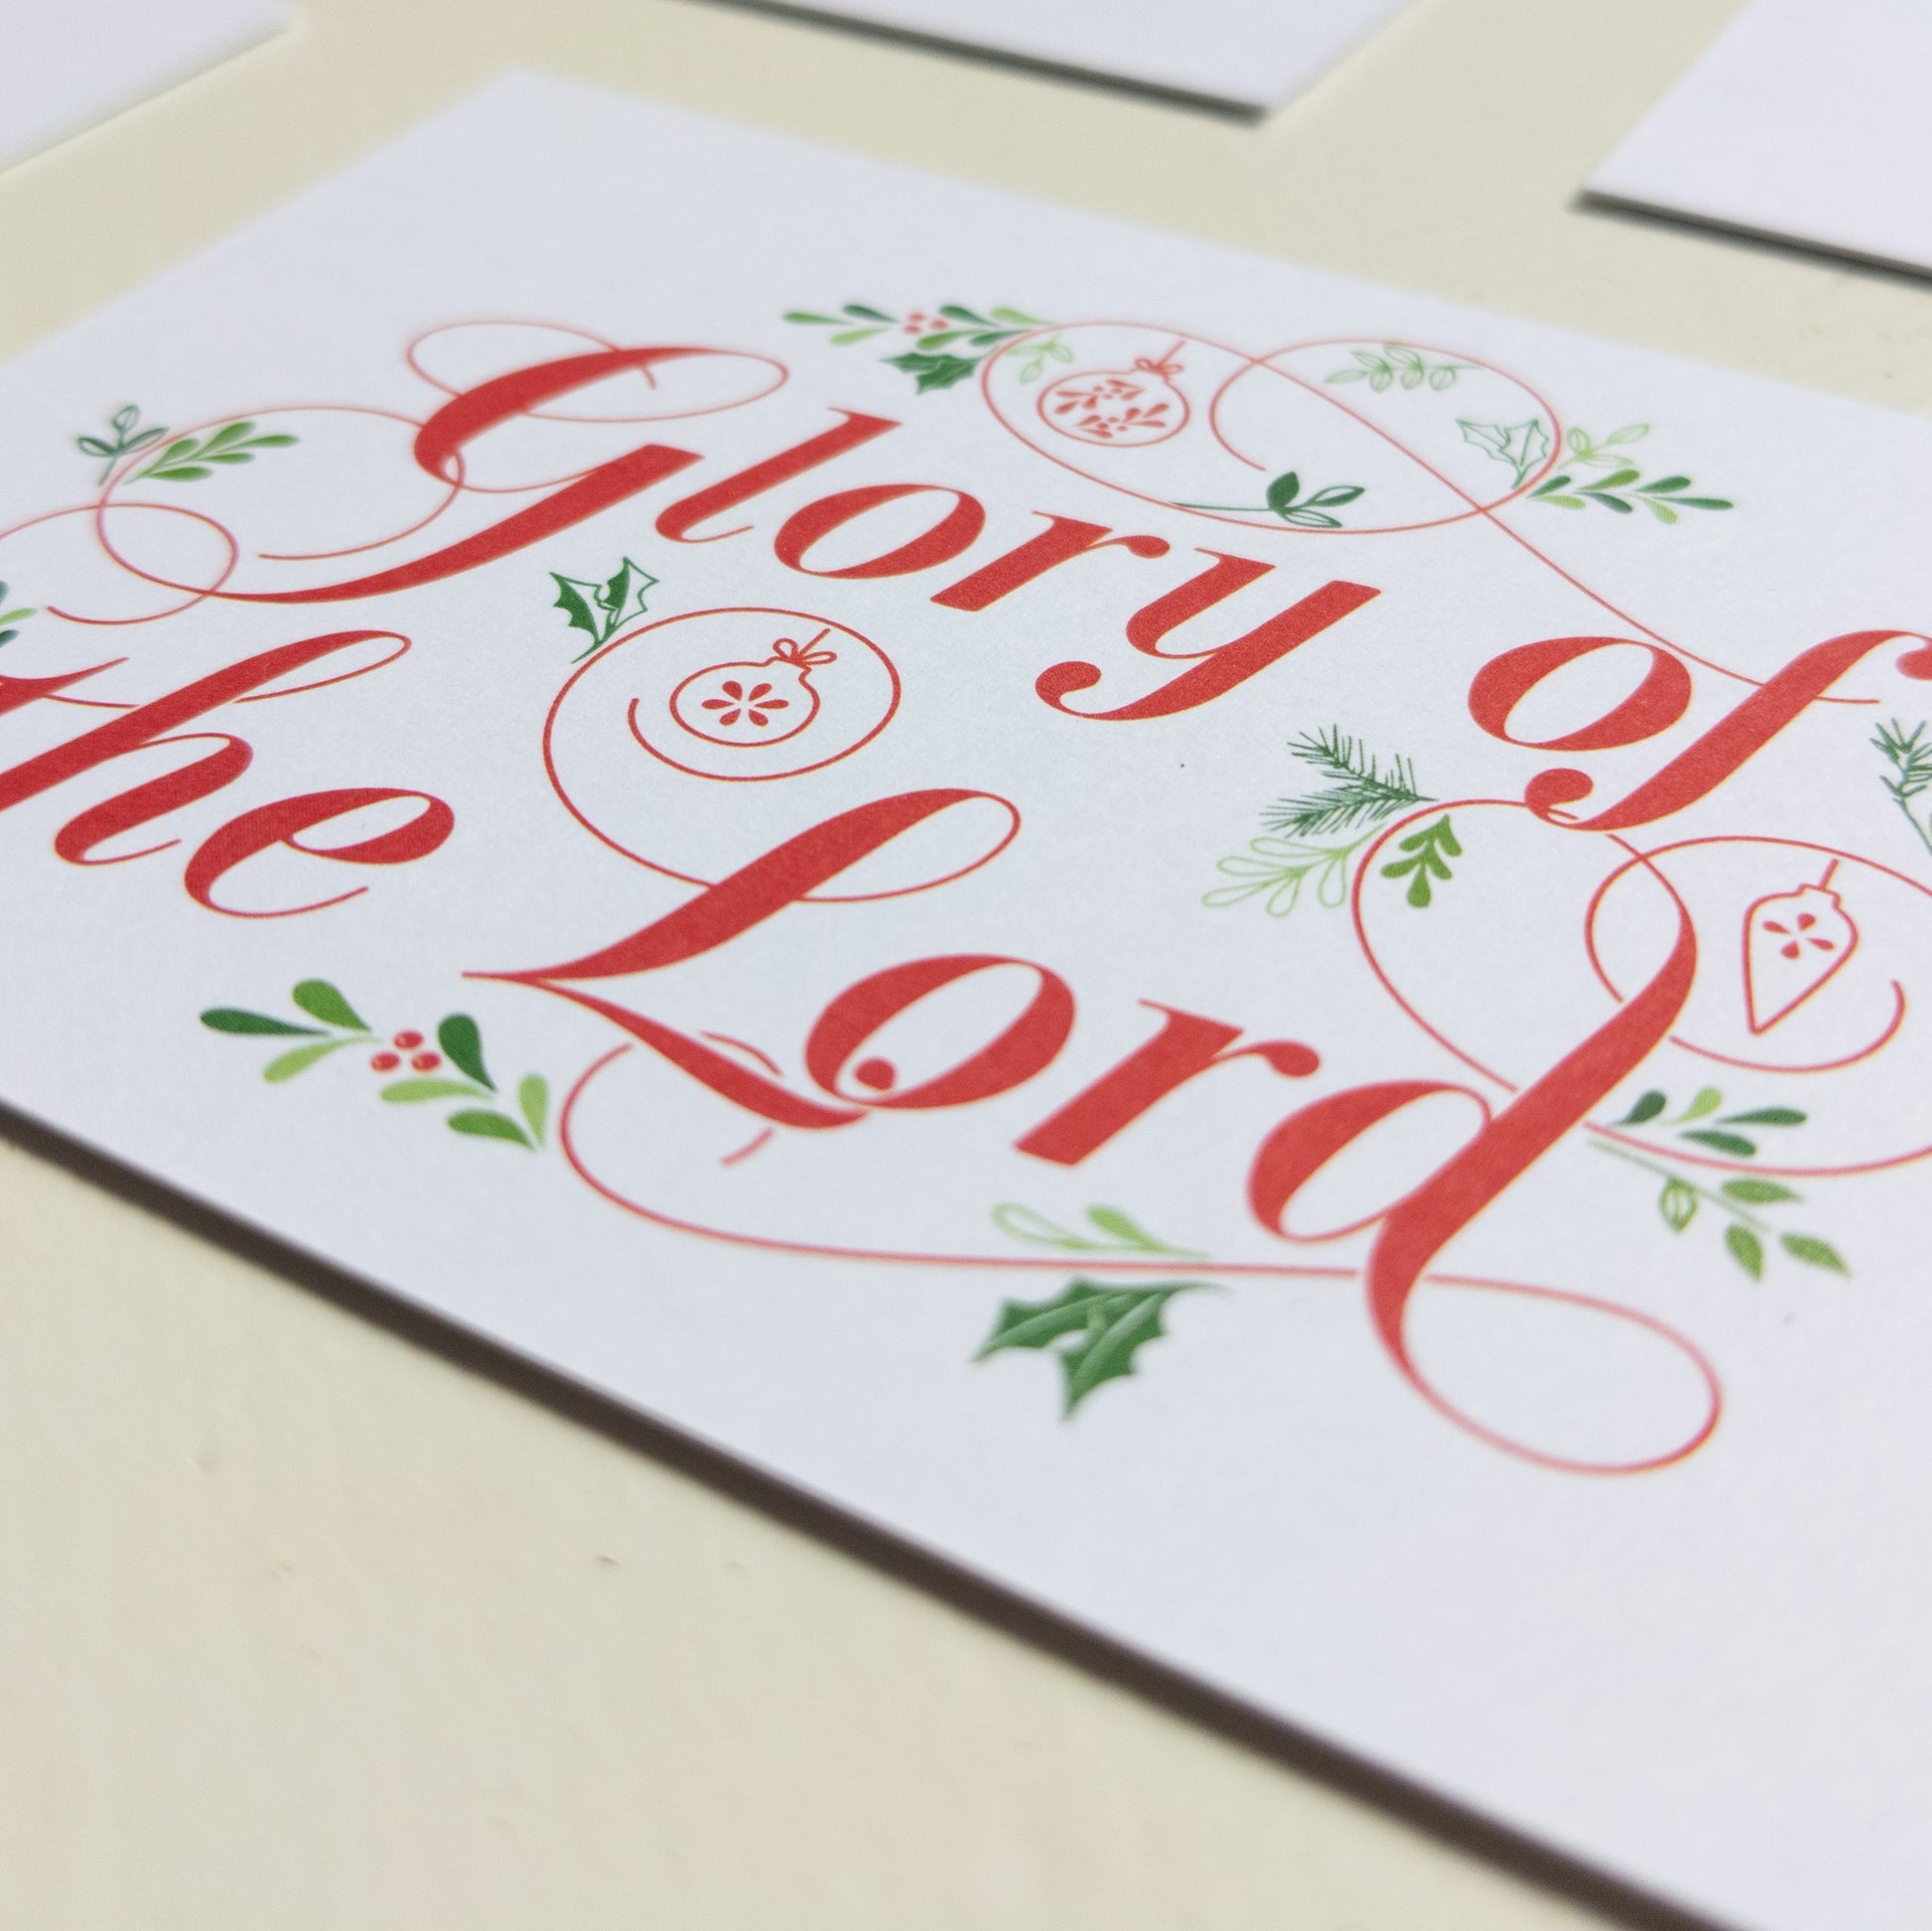 Christian advent card text, Glory of the Lord